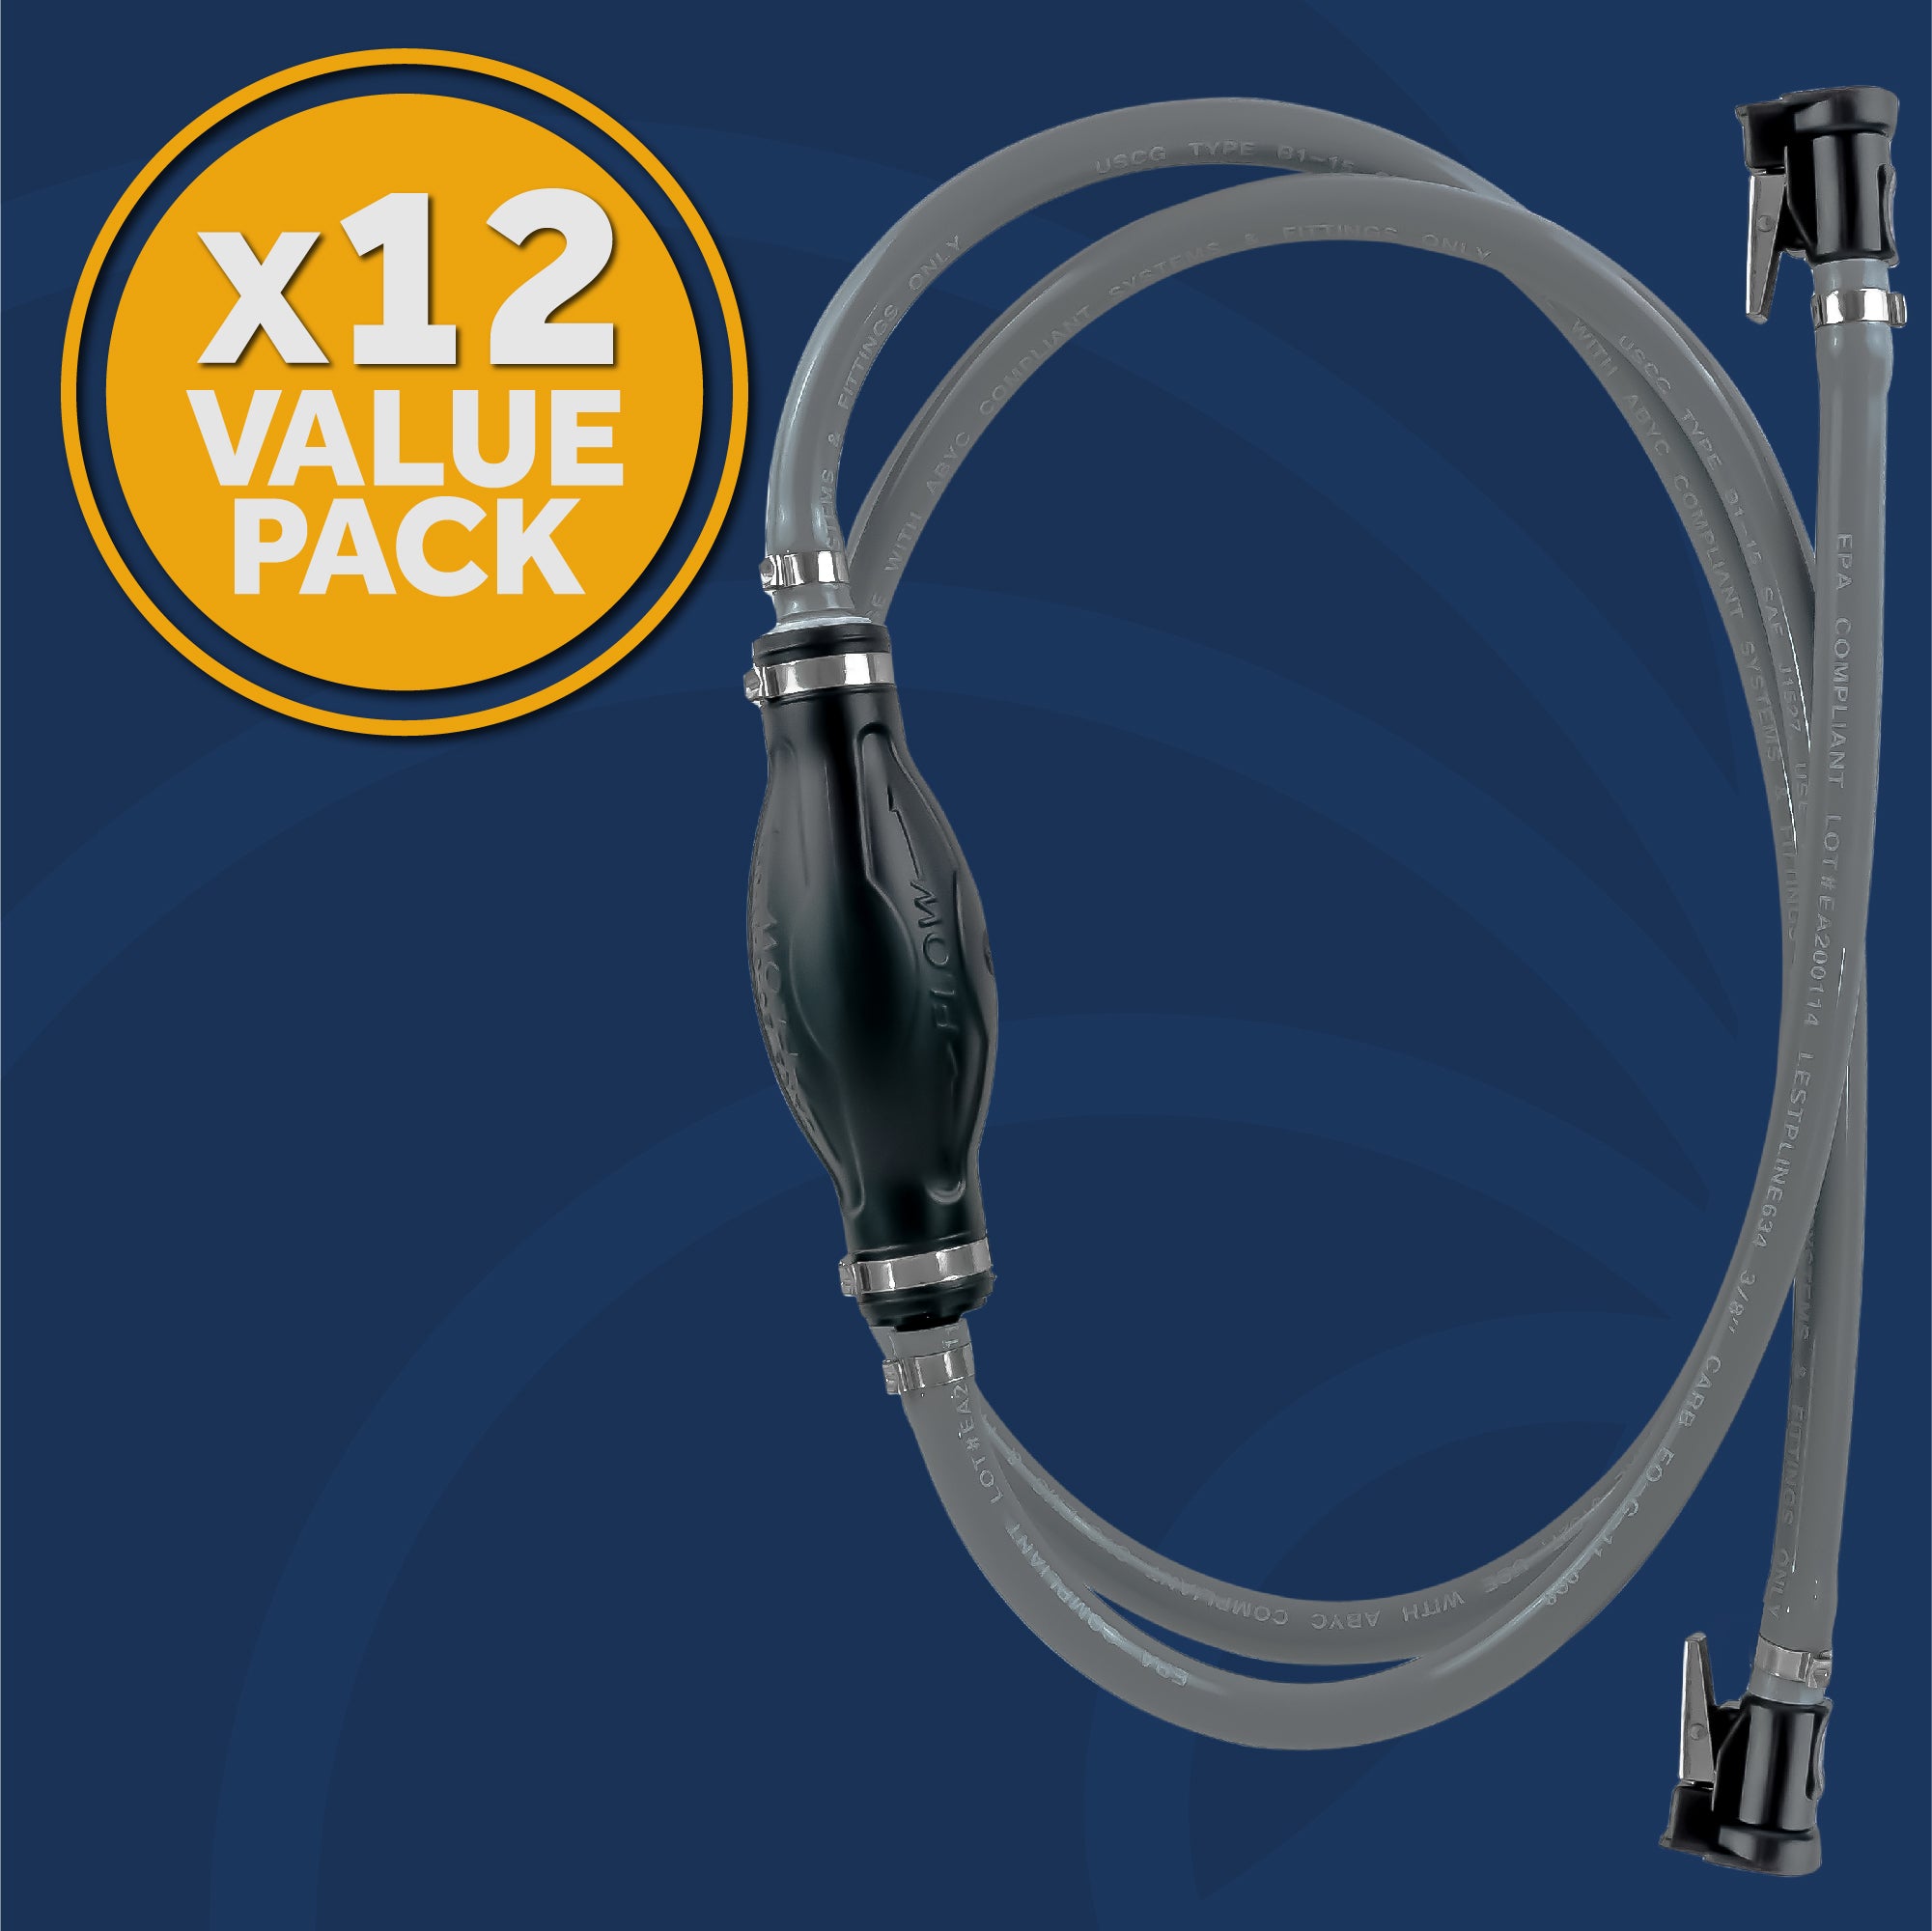 Fuel Line with Bulb for OMC/Johnson/Evinrude, 3/8 " Hose x 6' Long, EPA/CARB, 12-Pack - F04282-M12